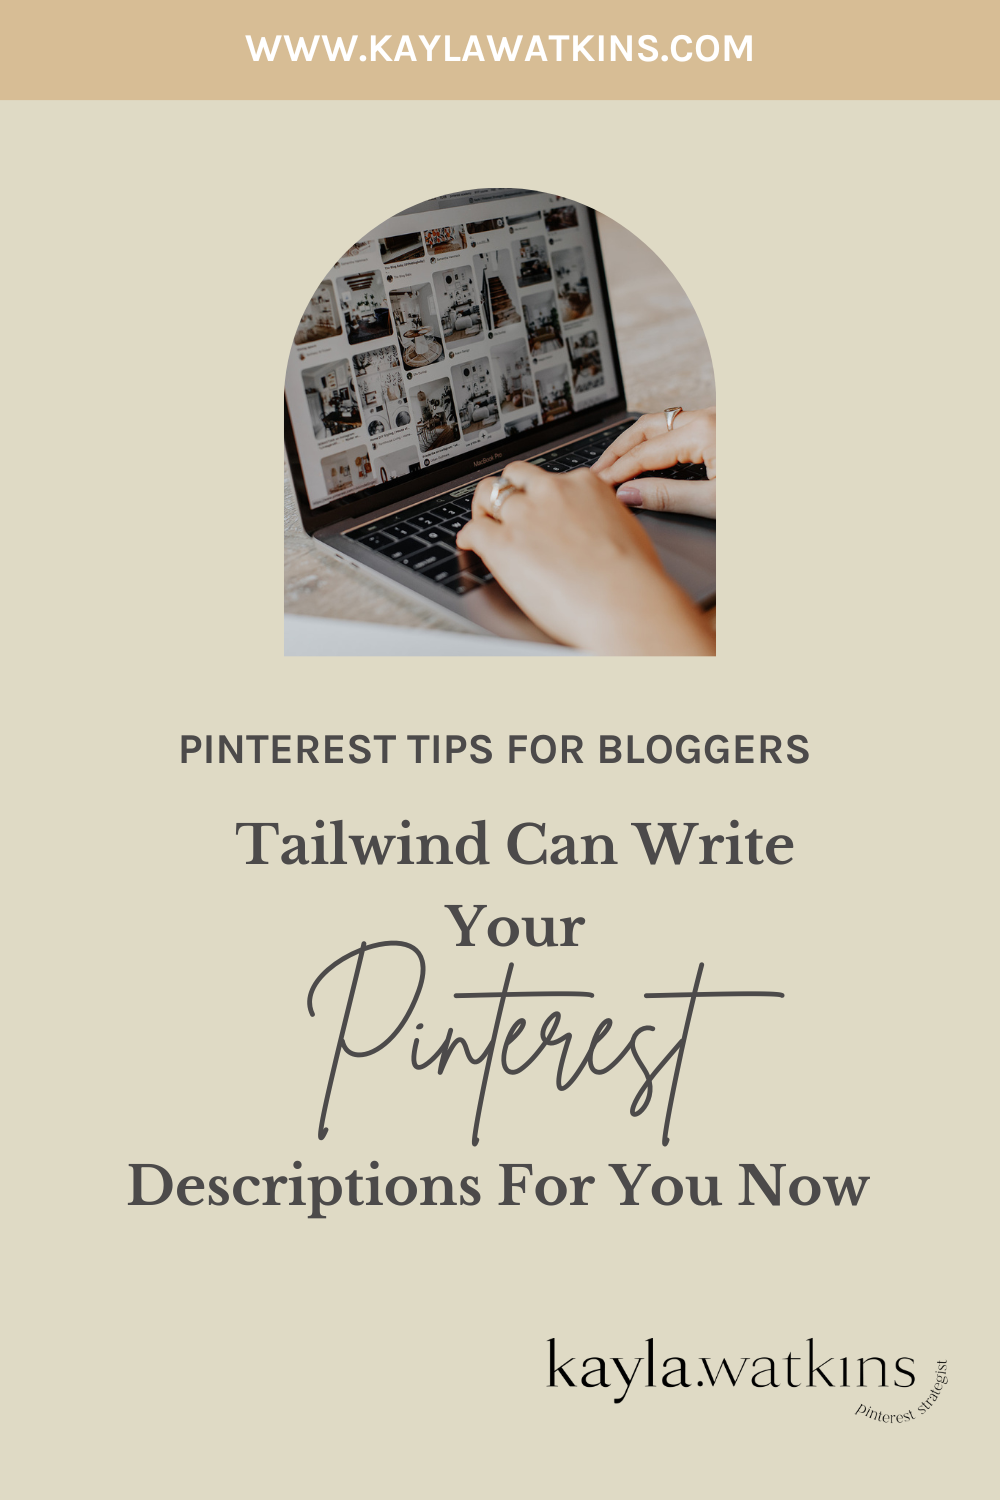 Tailwind Can Write Your Pinterest Descriptions For You Now